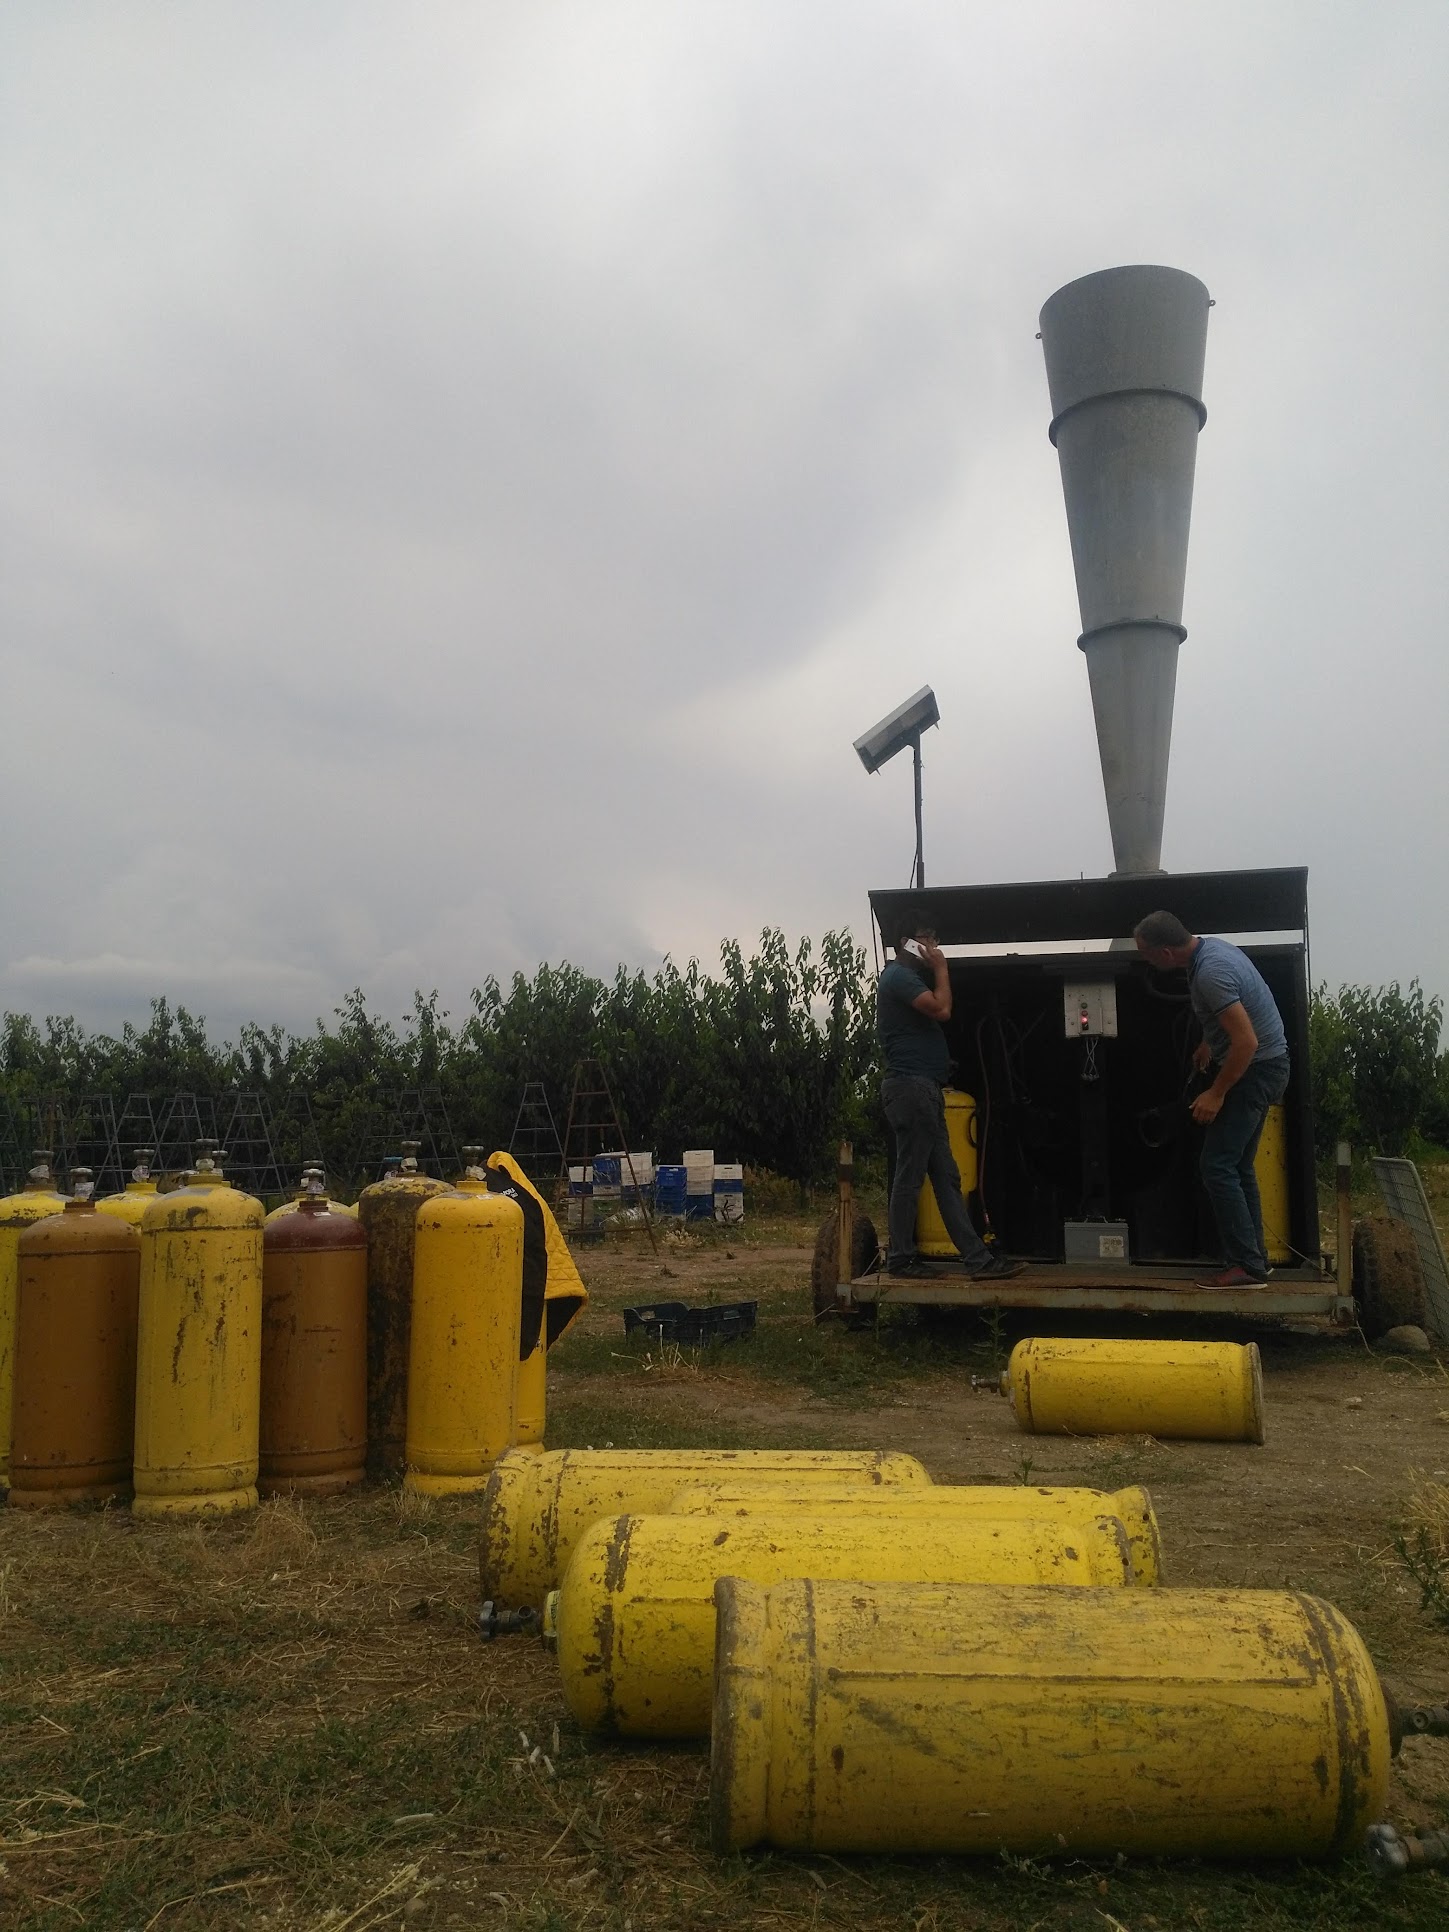 two figures on a box looking machine with a 20 foot inverted cone shape reacing towards the sky. there are a dozen large gas tanks around the figures who seem to be installing a pair of the tanks to the cone machine.